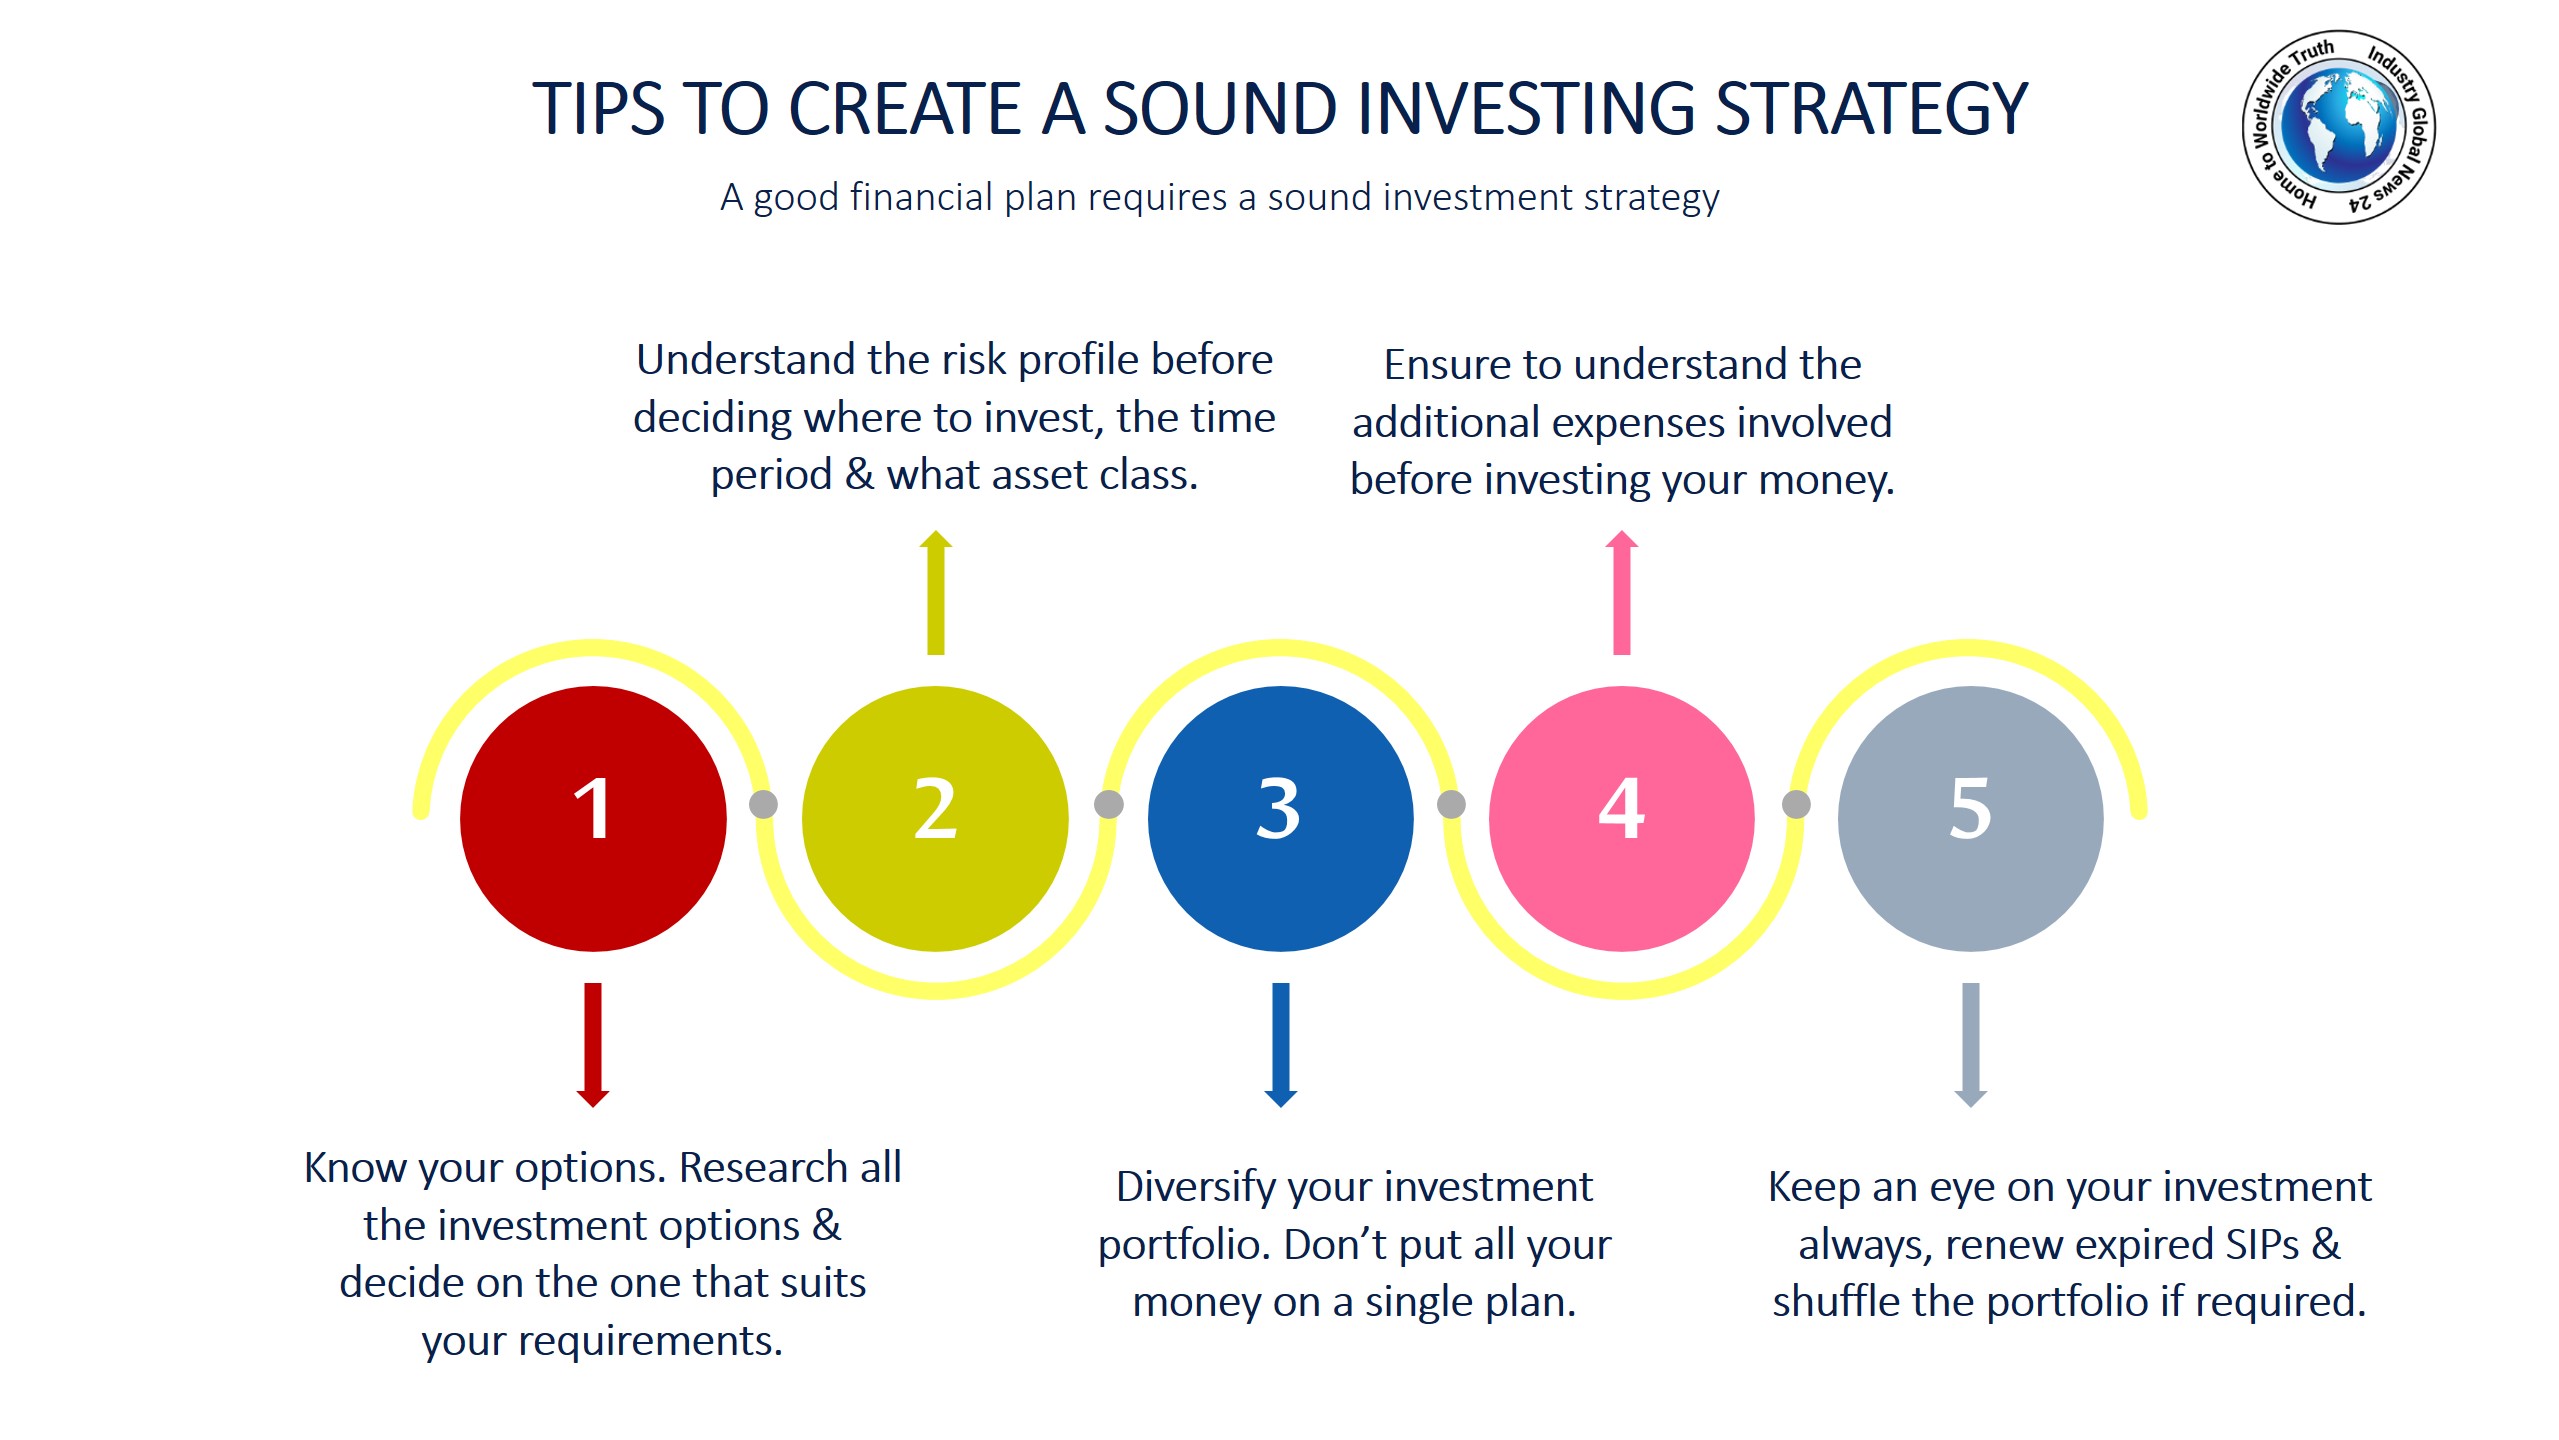 Tips to create a sound investing strategy